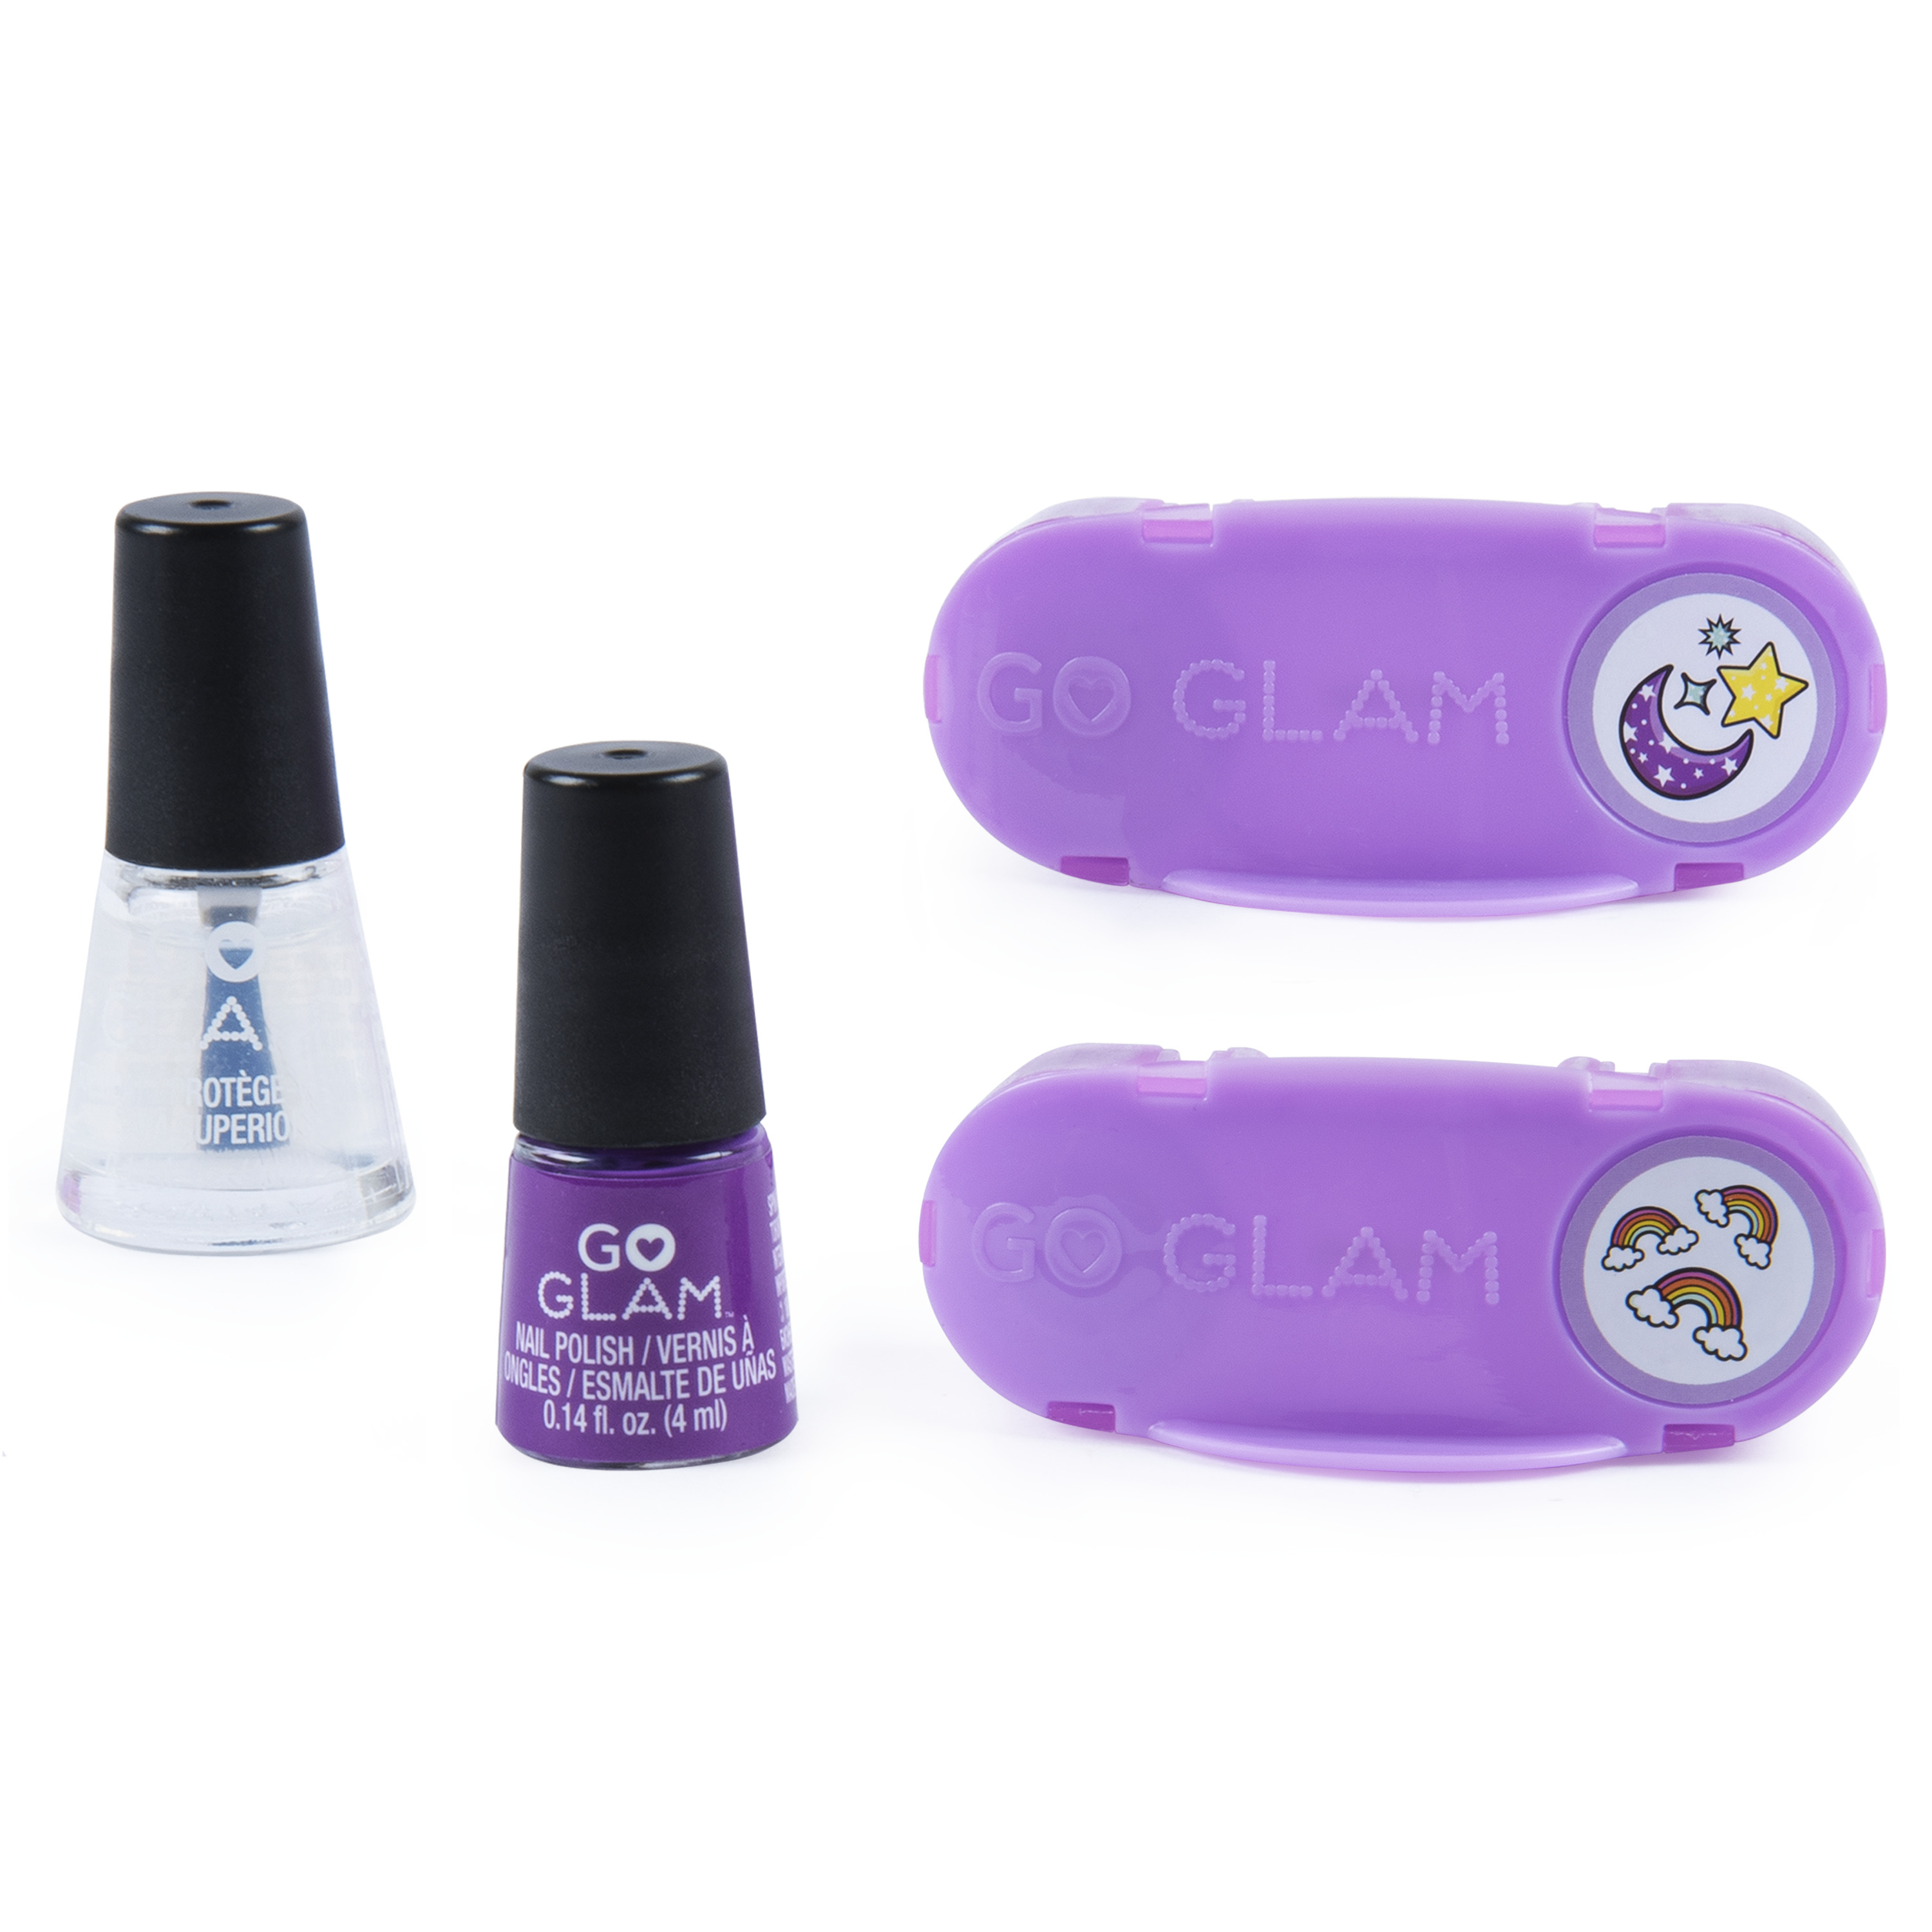 Amazon.com: COOL Maker 6046865 Go Glam Nails Fashion Packs Assortment  (Styles May Vary-One Supplied), Multicolored : Beauty & Personal Care